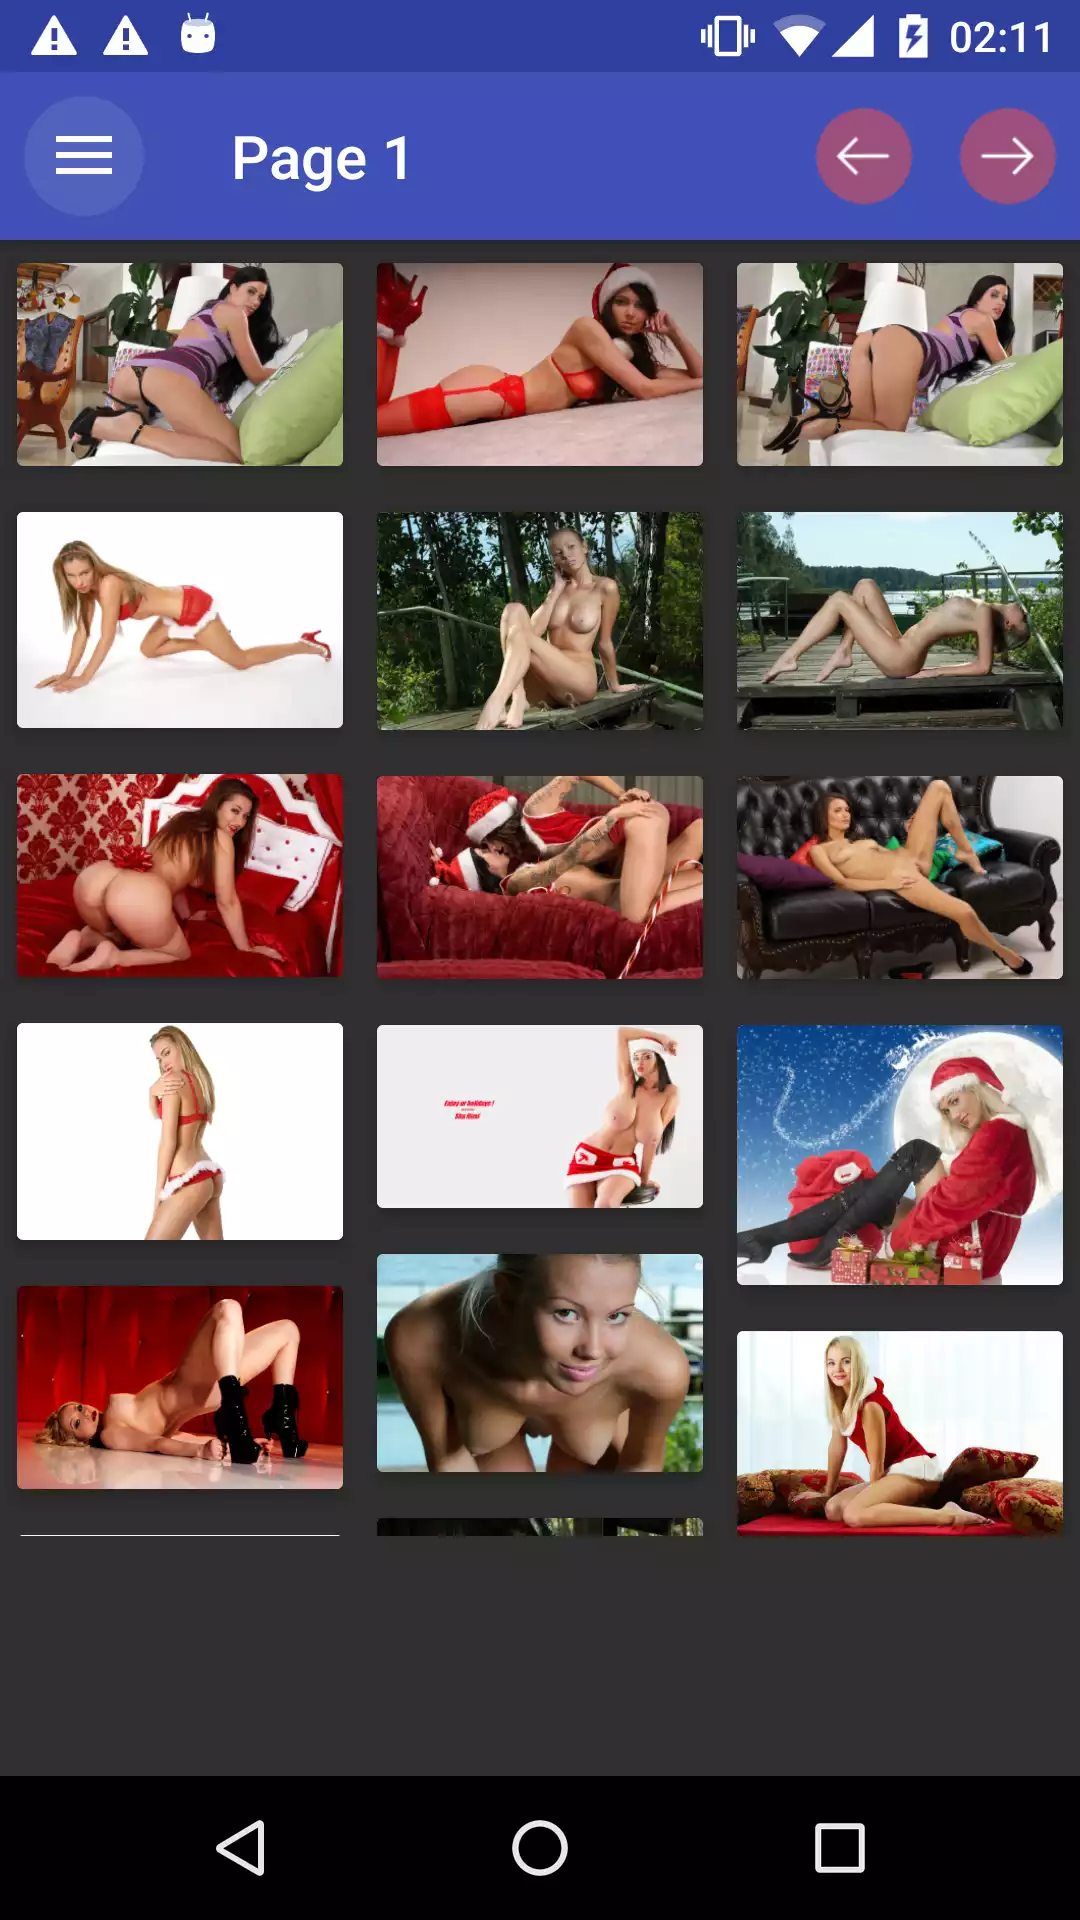 xxx-holidays alexis,wallpapers,video,android,photos,best,apps,offline,porn,watching,photo,pics,backgrounds,pictures,pornstar,texas,mature,gallery,sexy,apk,app,hentai